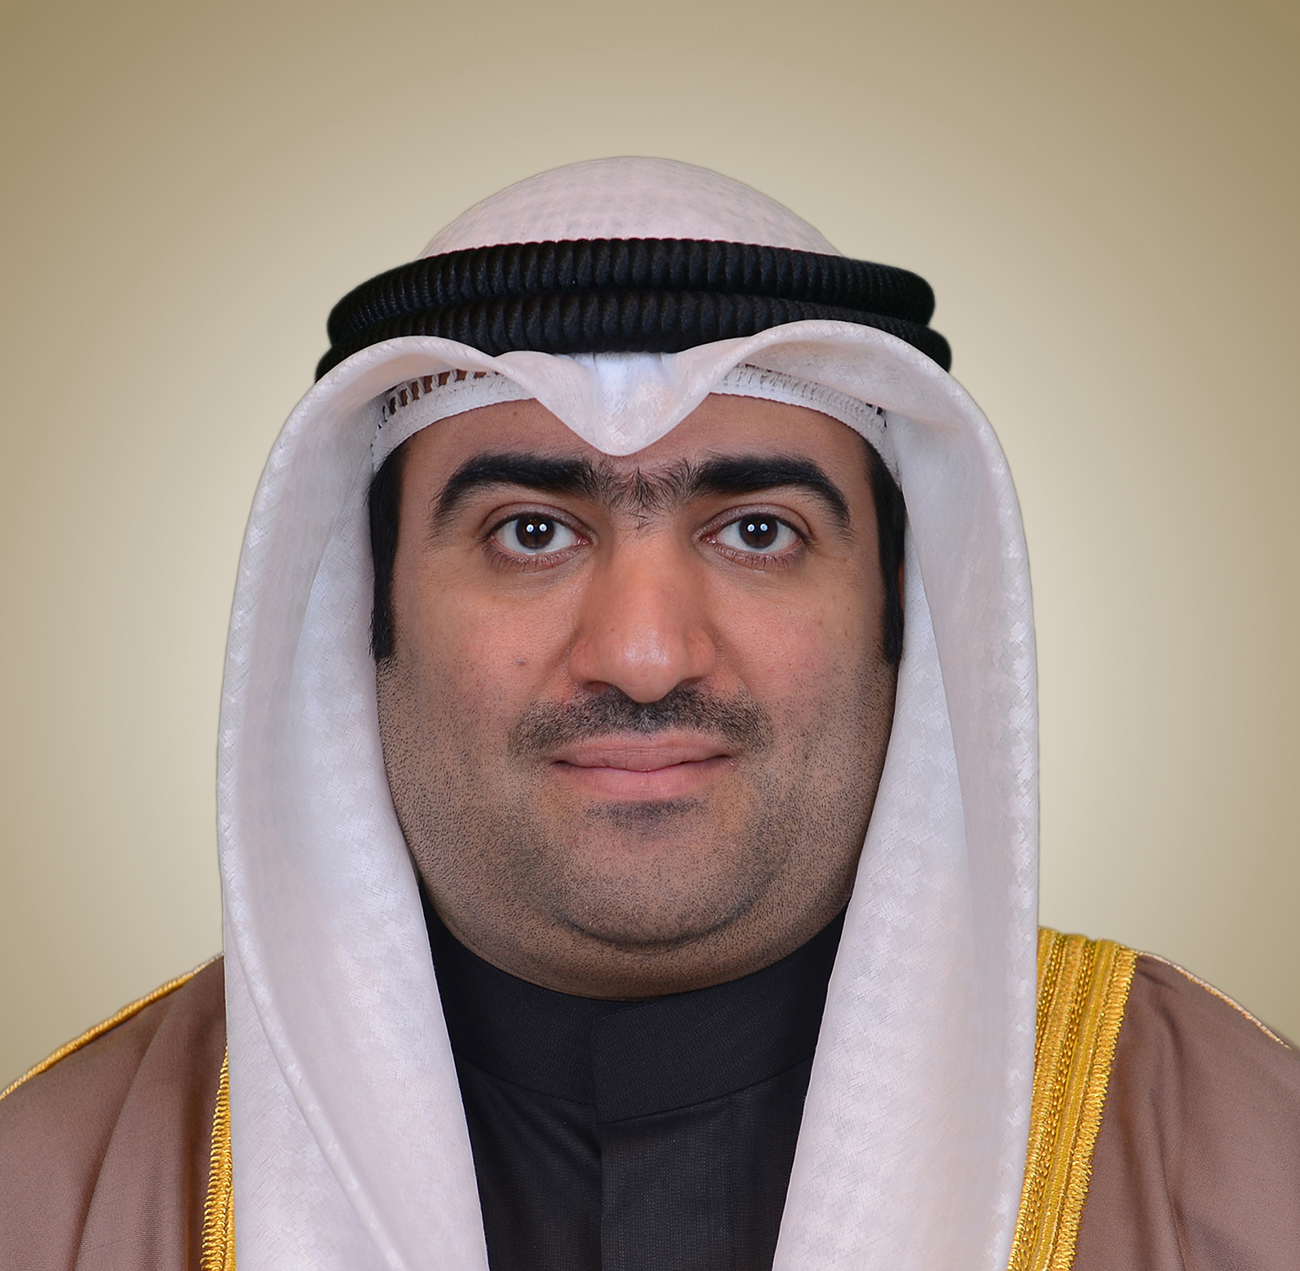 Kuwait's Minister of Commerce and Industry and Minister of State for Youth Affairs Khaled Al-Roudhan